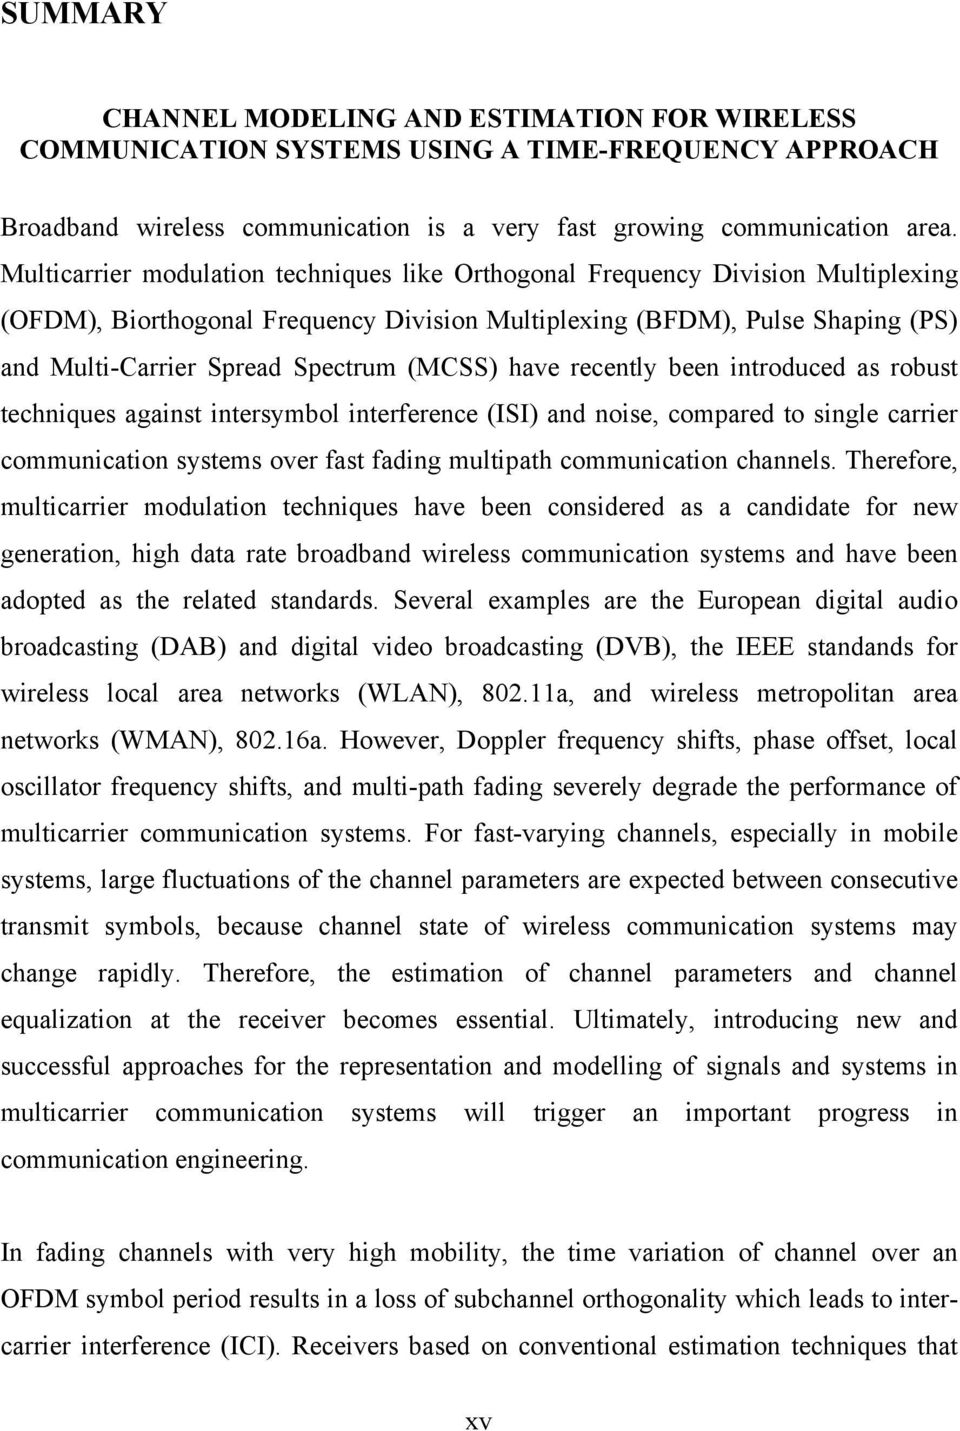 (MCSS) have recently been introduced as robust techniques against intersymbol interference (ISI) and noise, compared to single carrier communication systems over fast fading multipath communication